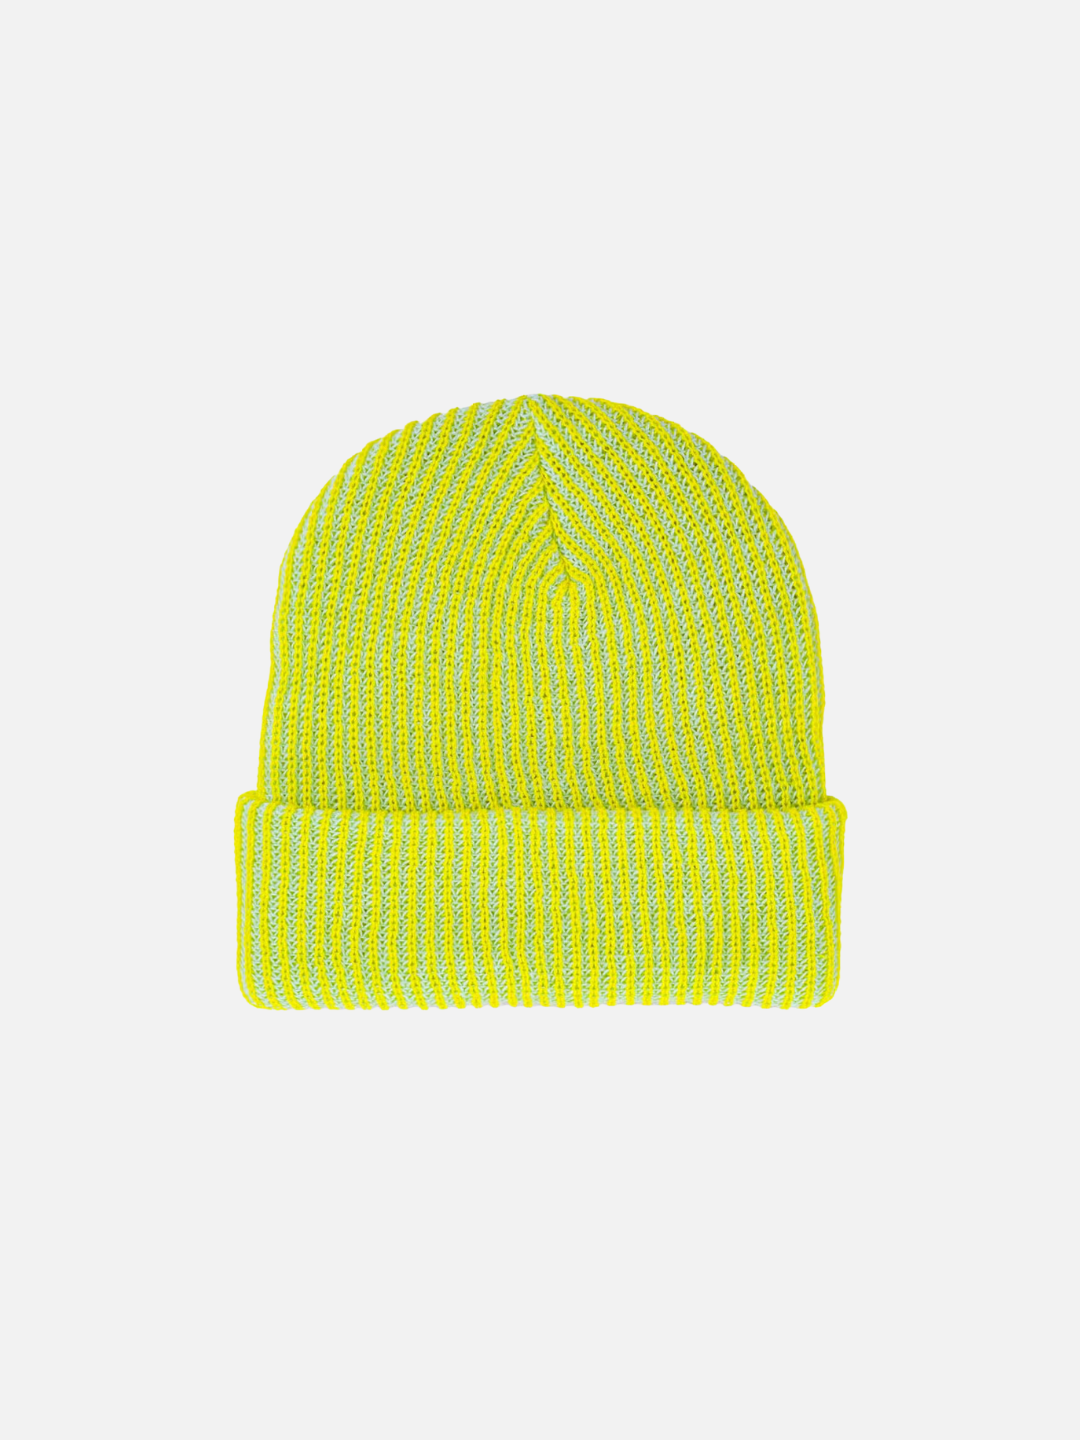 Yellow/Jade | Front view of a neon yellow ribbed beanie for big kids and adults, with a ribbed cuff. The ribbed texture reveals a second yarn color that's pale green.